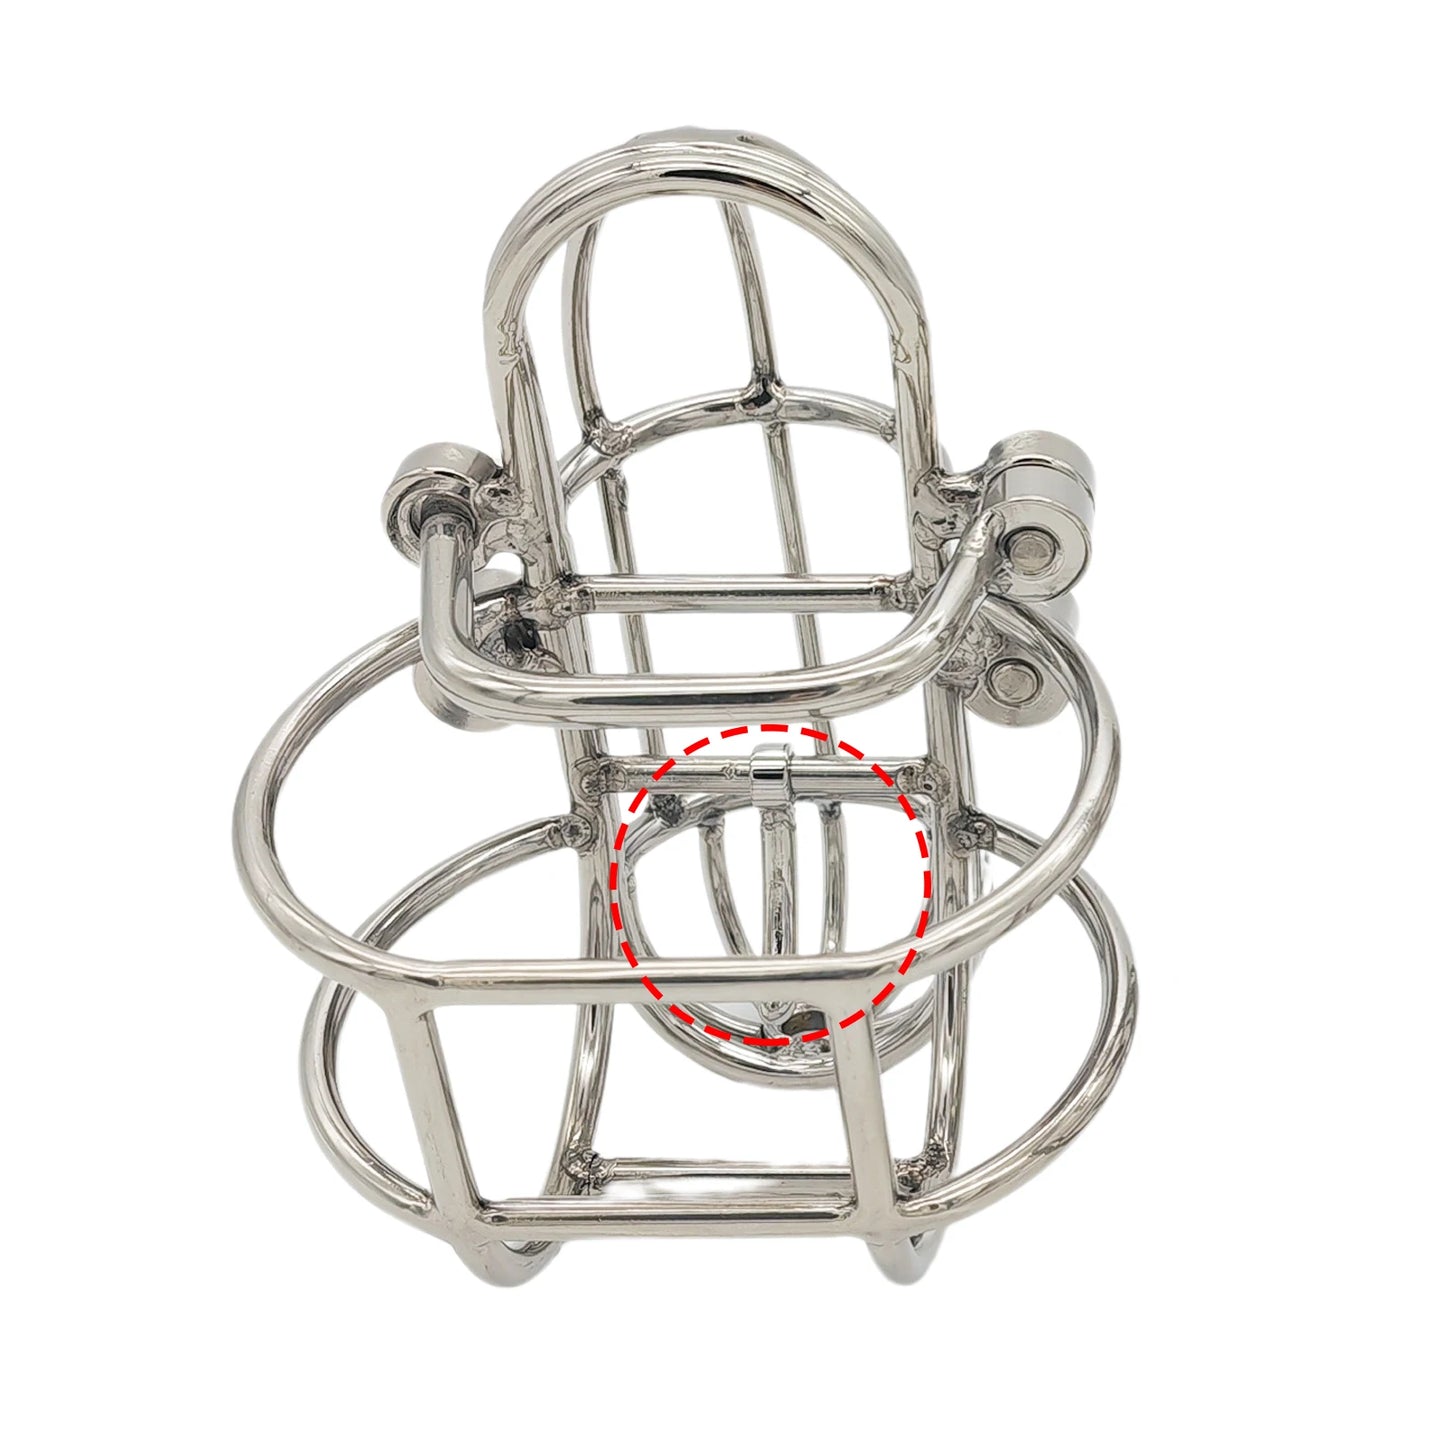 Upgraded Version Stainless Steel Male Chastity Device, PA Puncture Cock Cage, Penis Ring Lock, Penis Sleeves, Chastity Belt